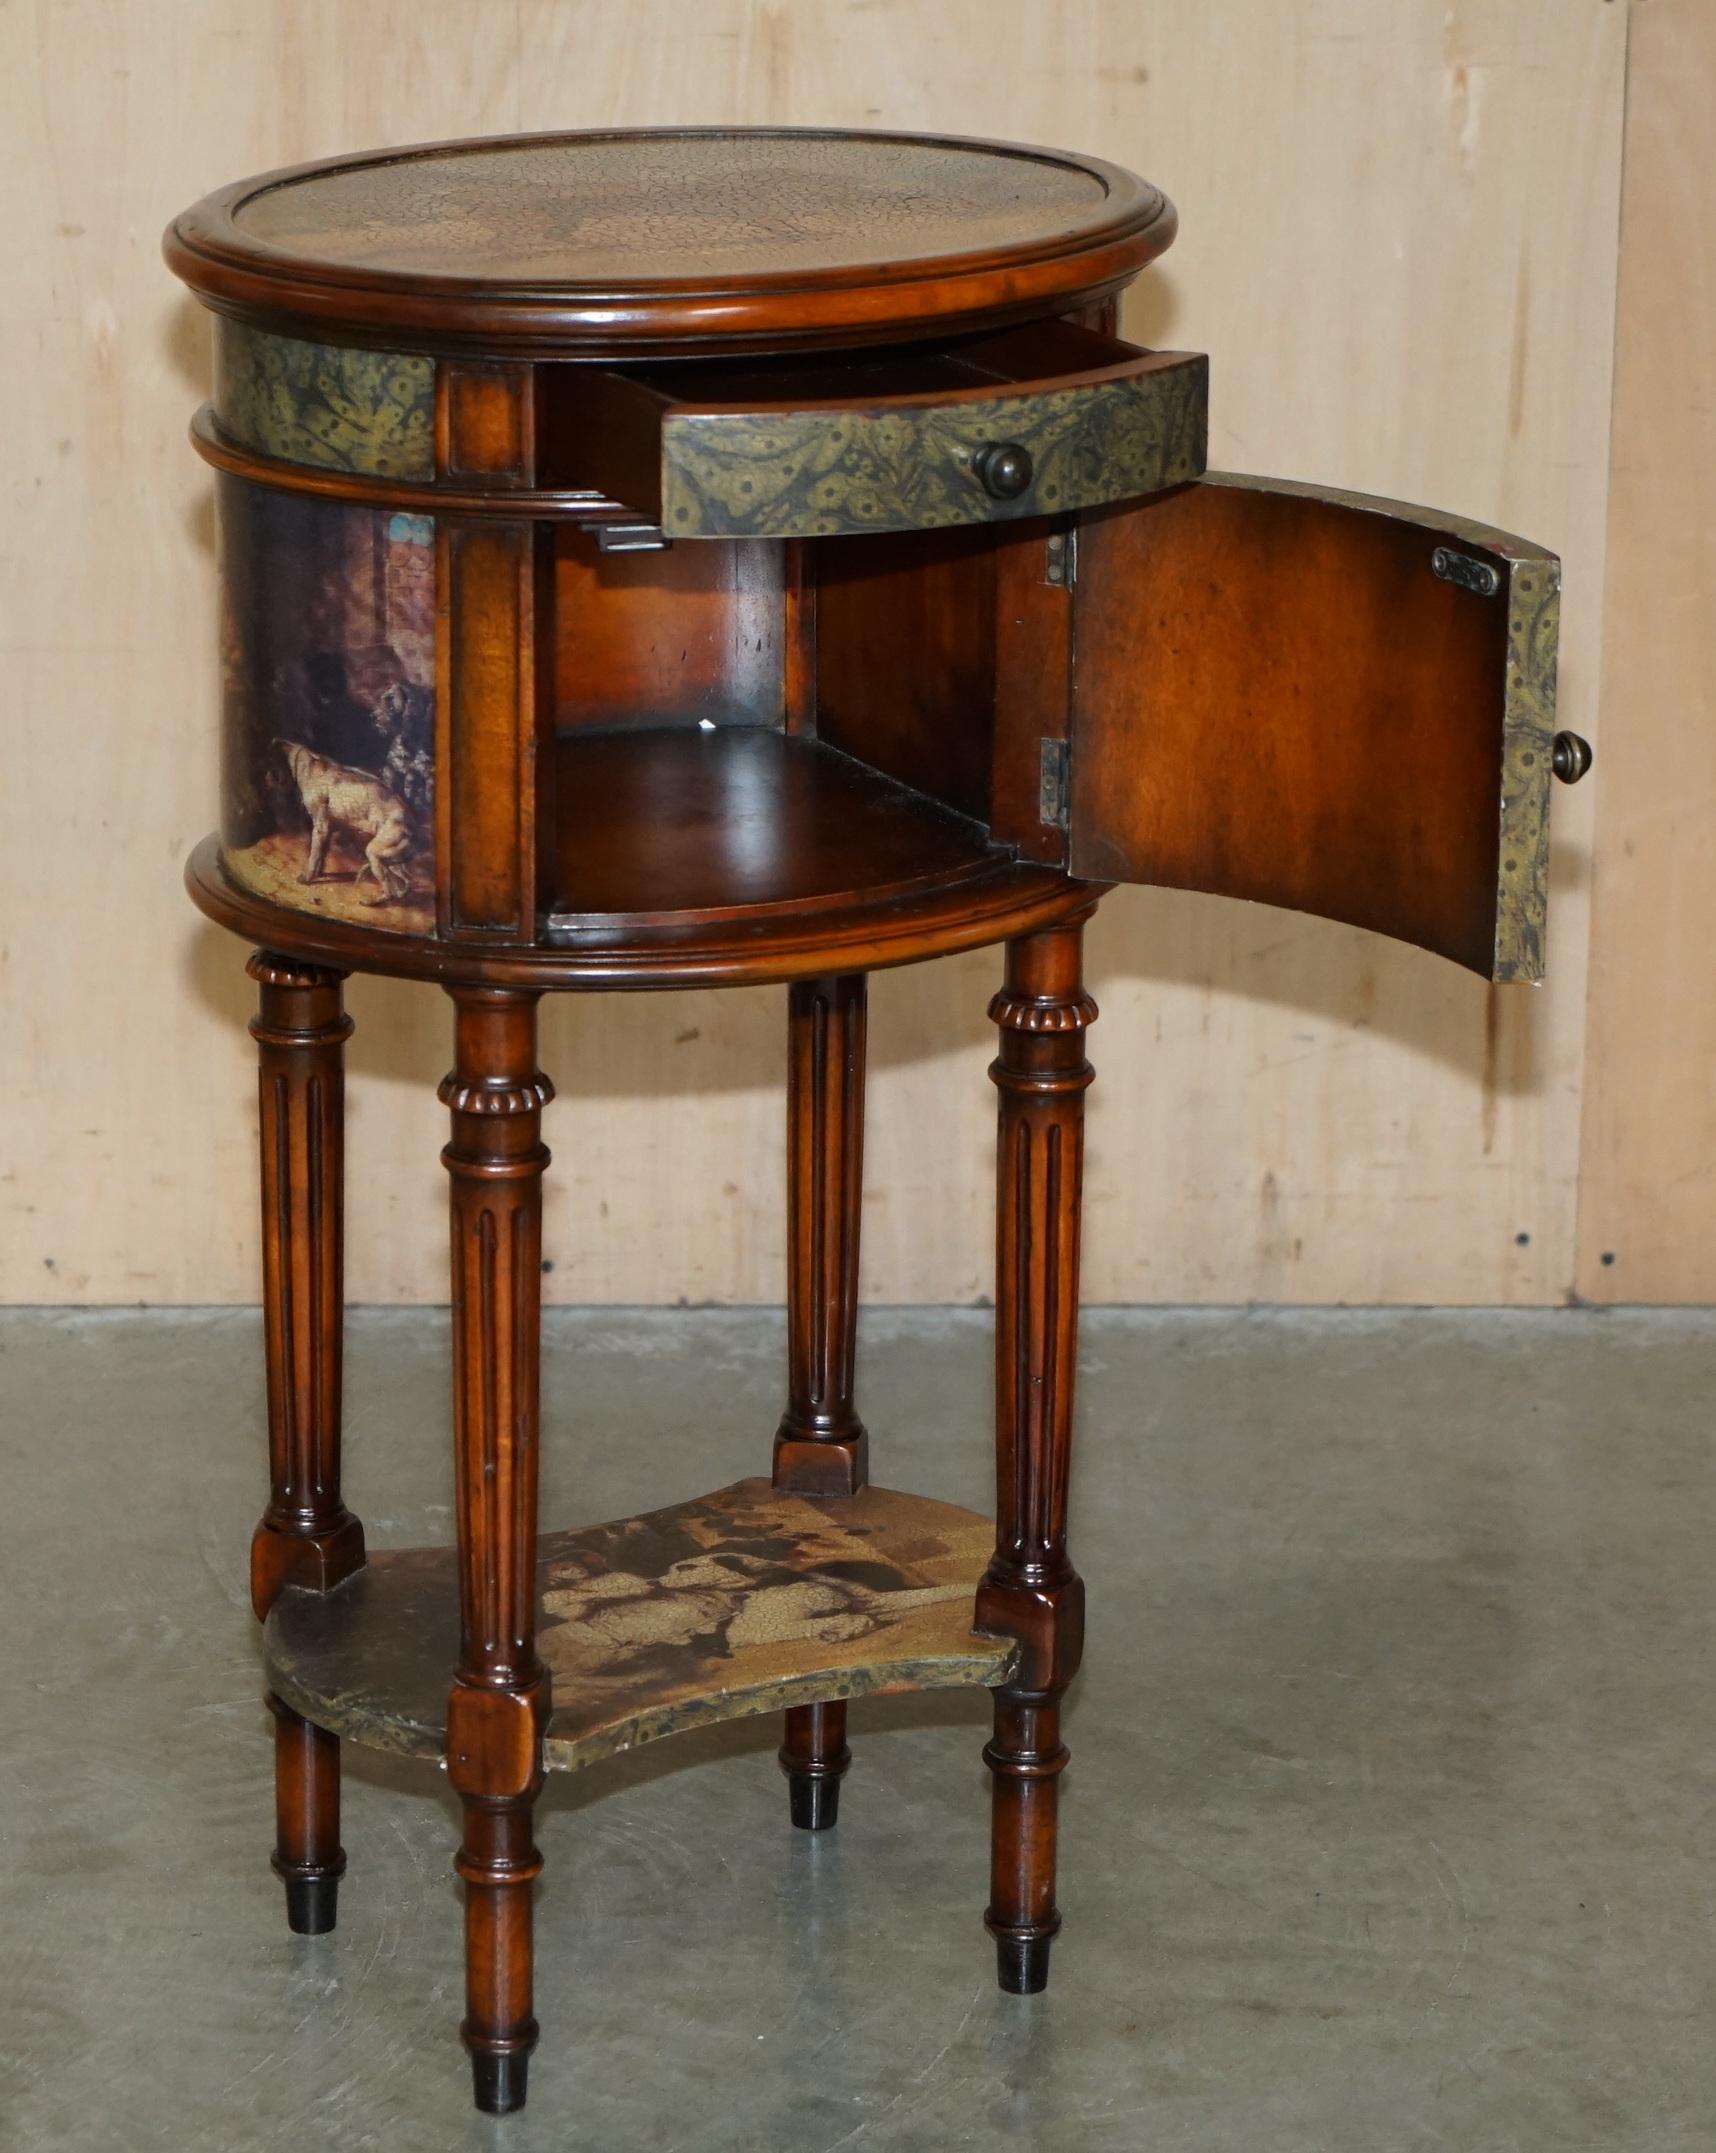 EXQUISITE TWO TIER TALL SiDE TABLE CABINET LEATHER CLADDED & PAINTED WITH DOGS For Sale 8